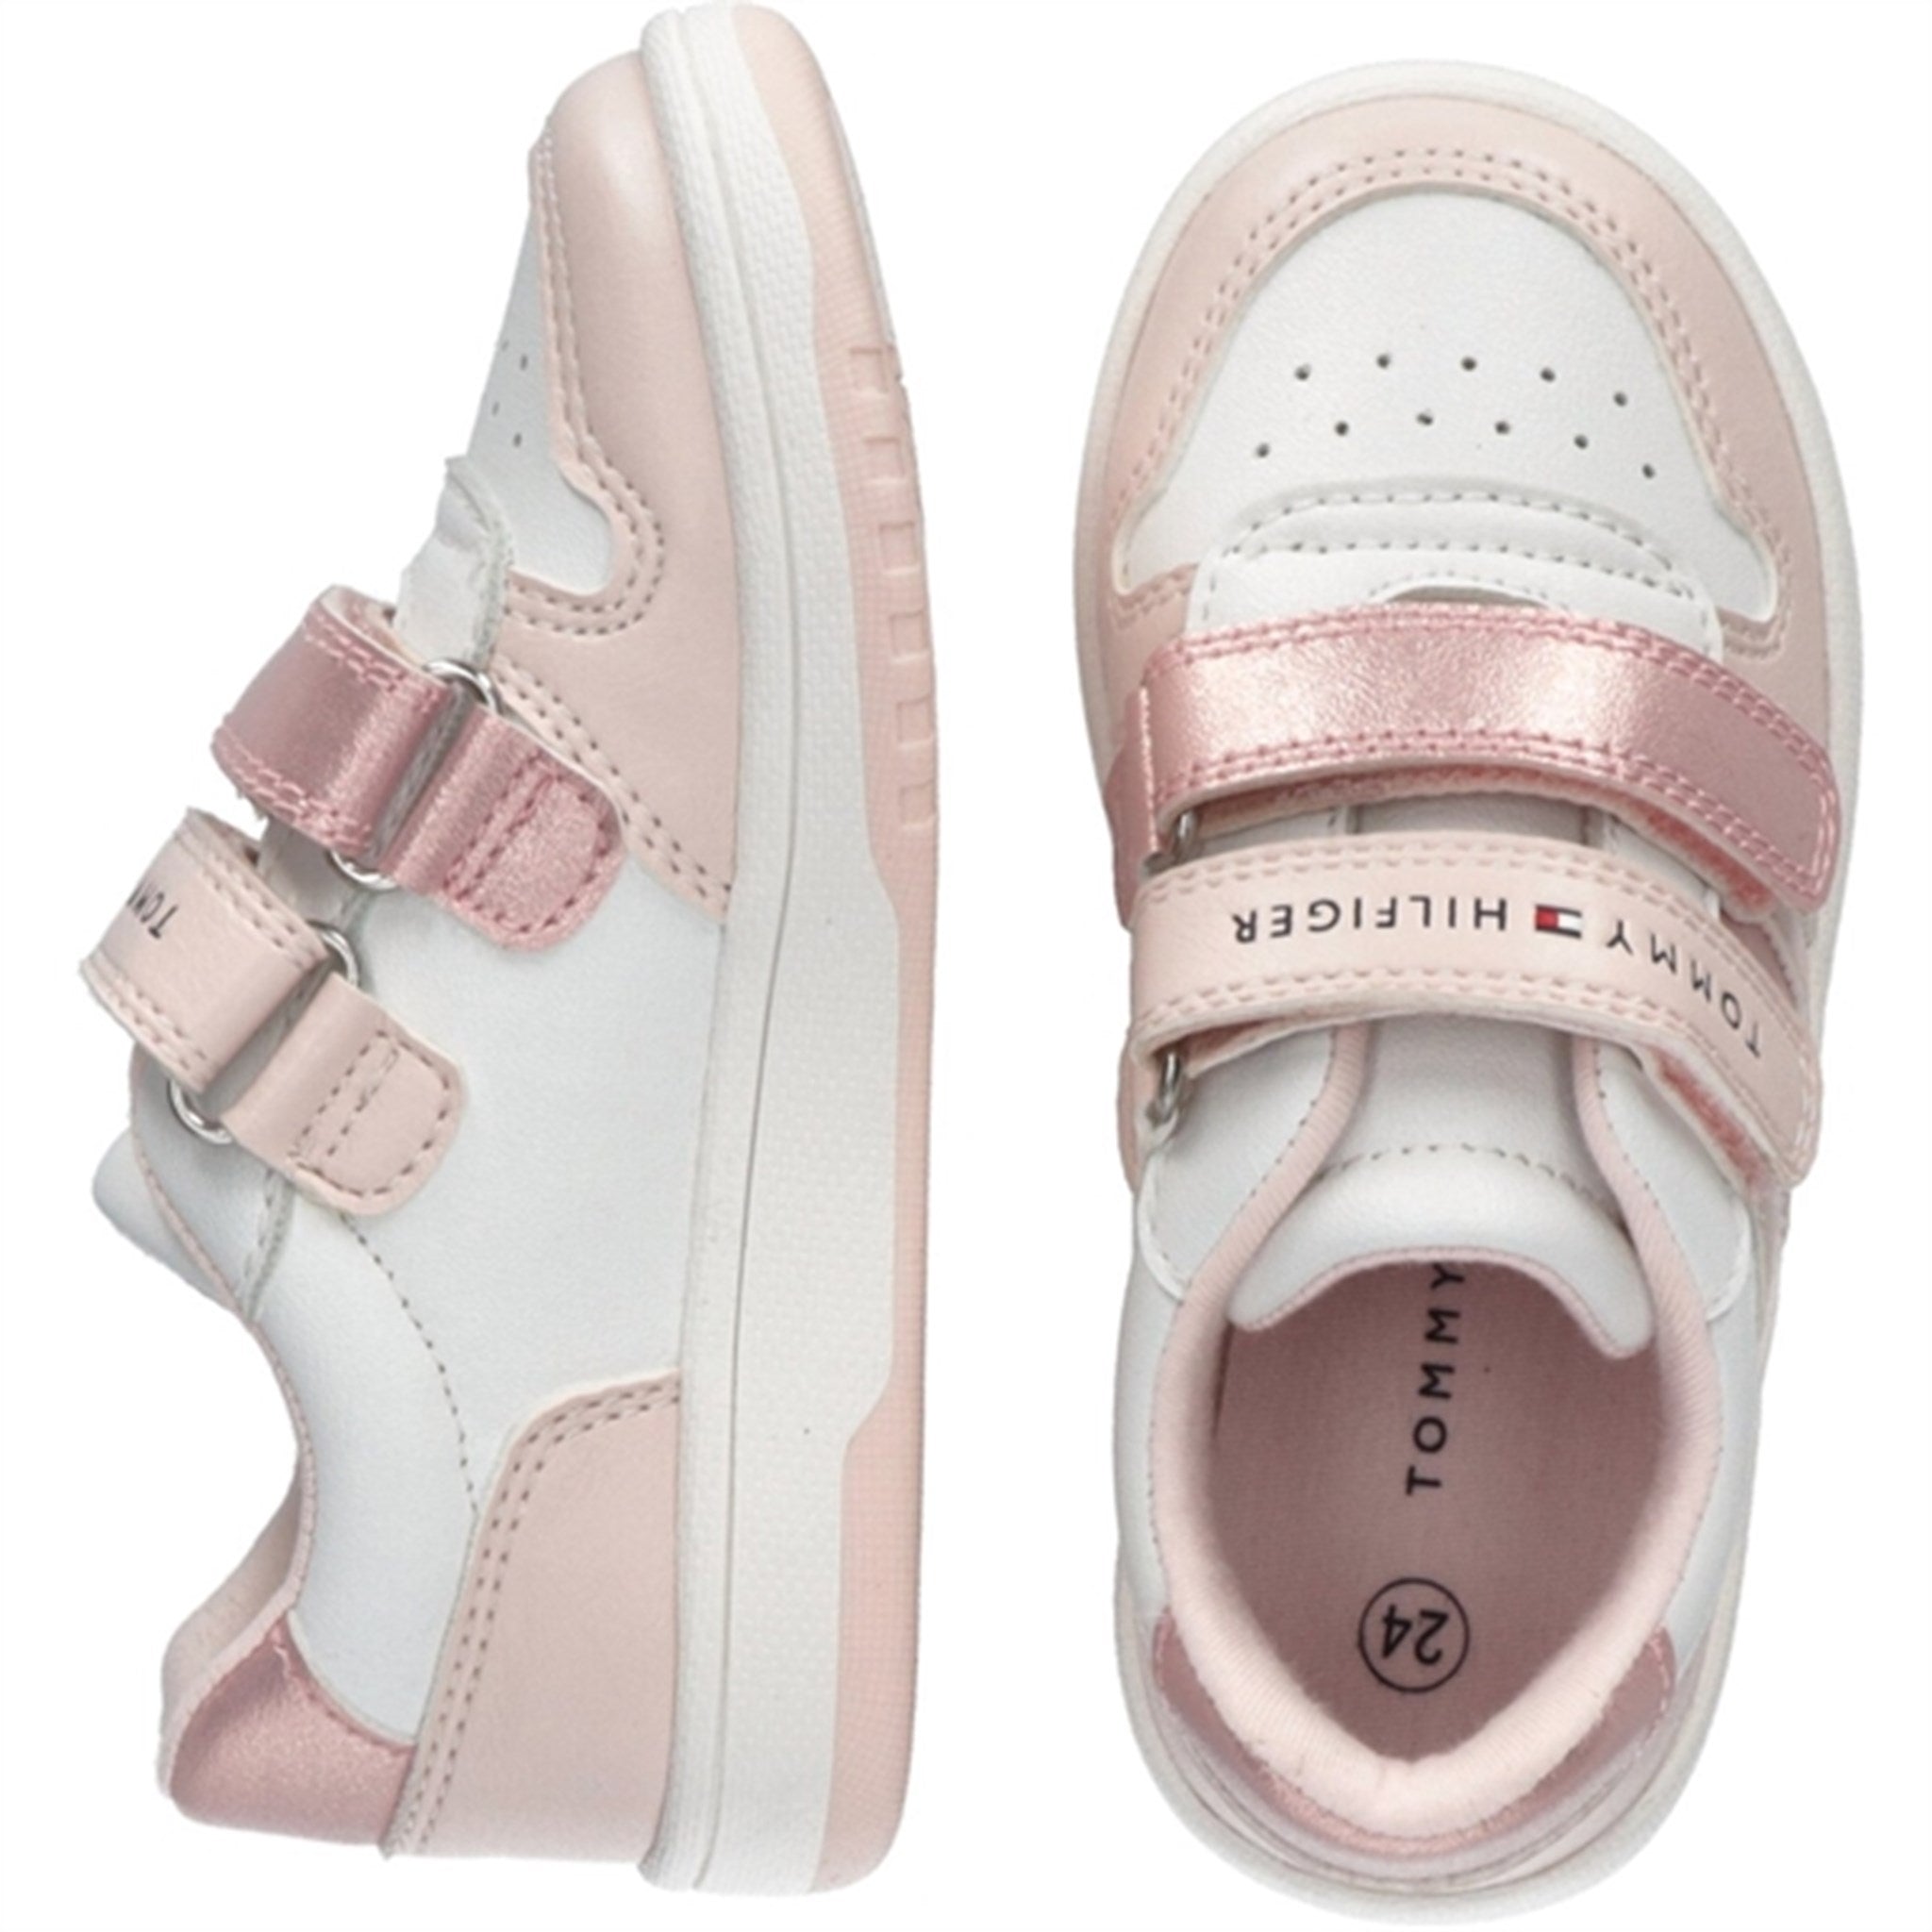 Tommy Hilfiger Low Cut Velcro Sneakers Pink/White 2